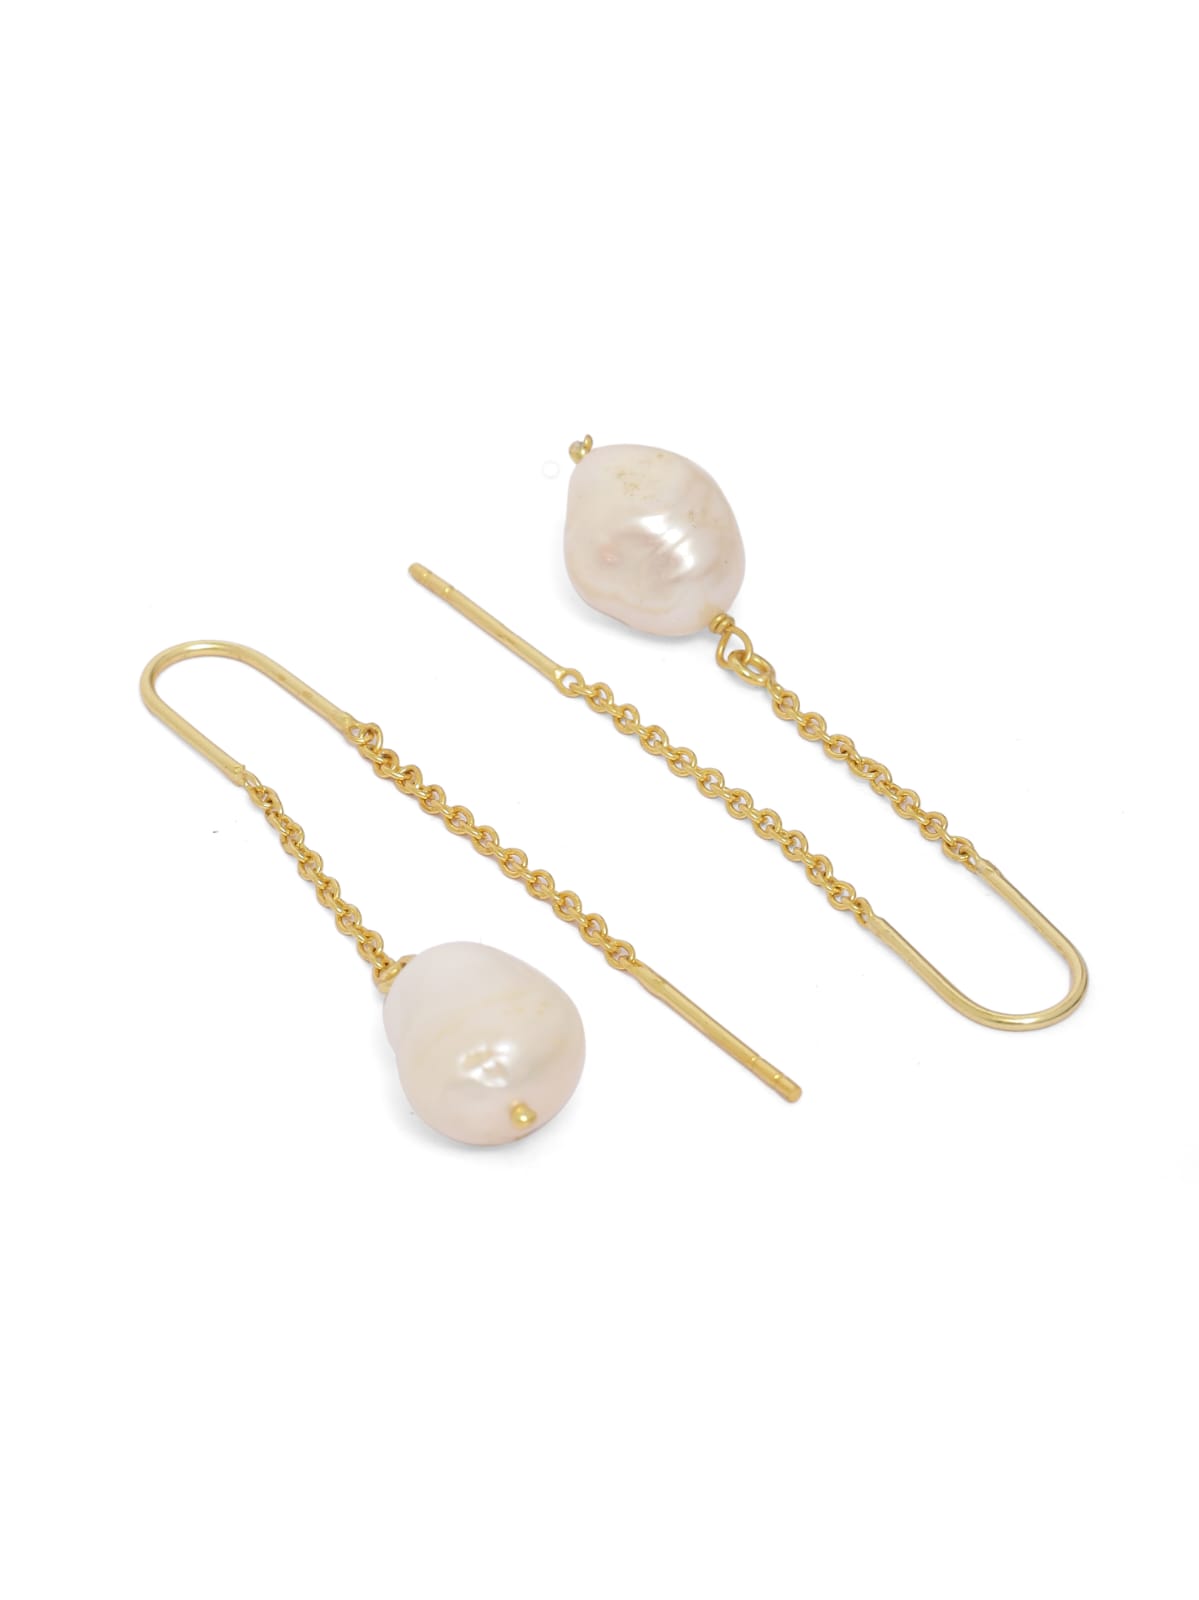 92.5 sterling Silver Gold plated Pearl threader earrings.